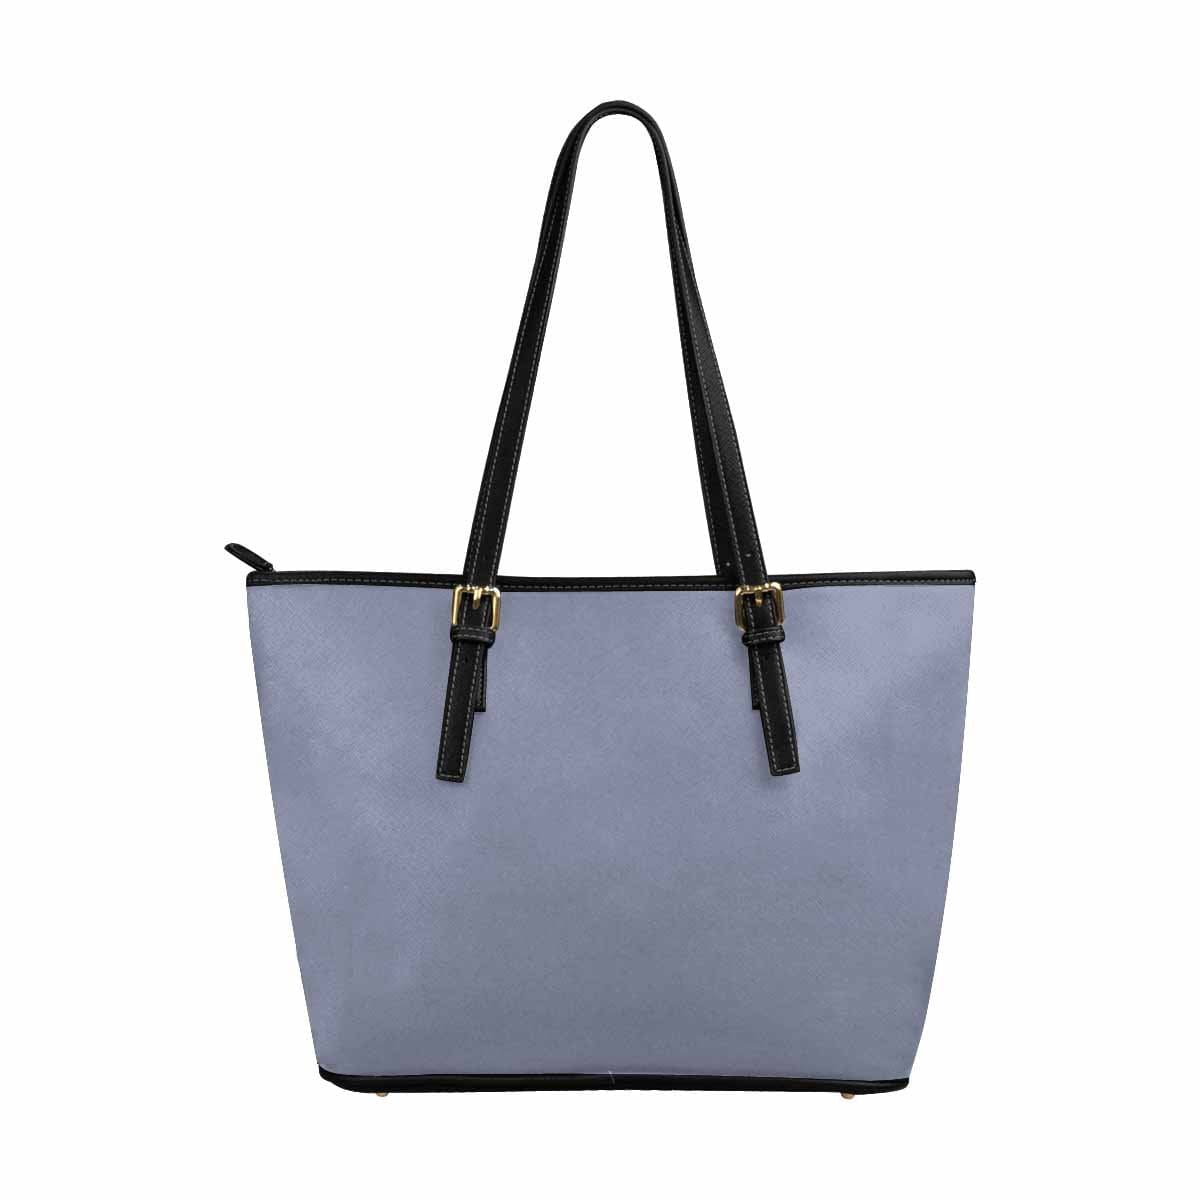 Large Leather Tote Shoulder Bag - Cool Gray - Bags | Leather Tote Bags